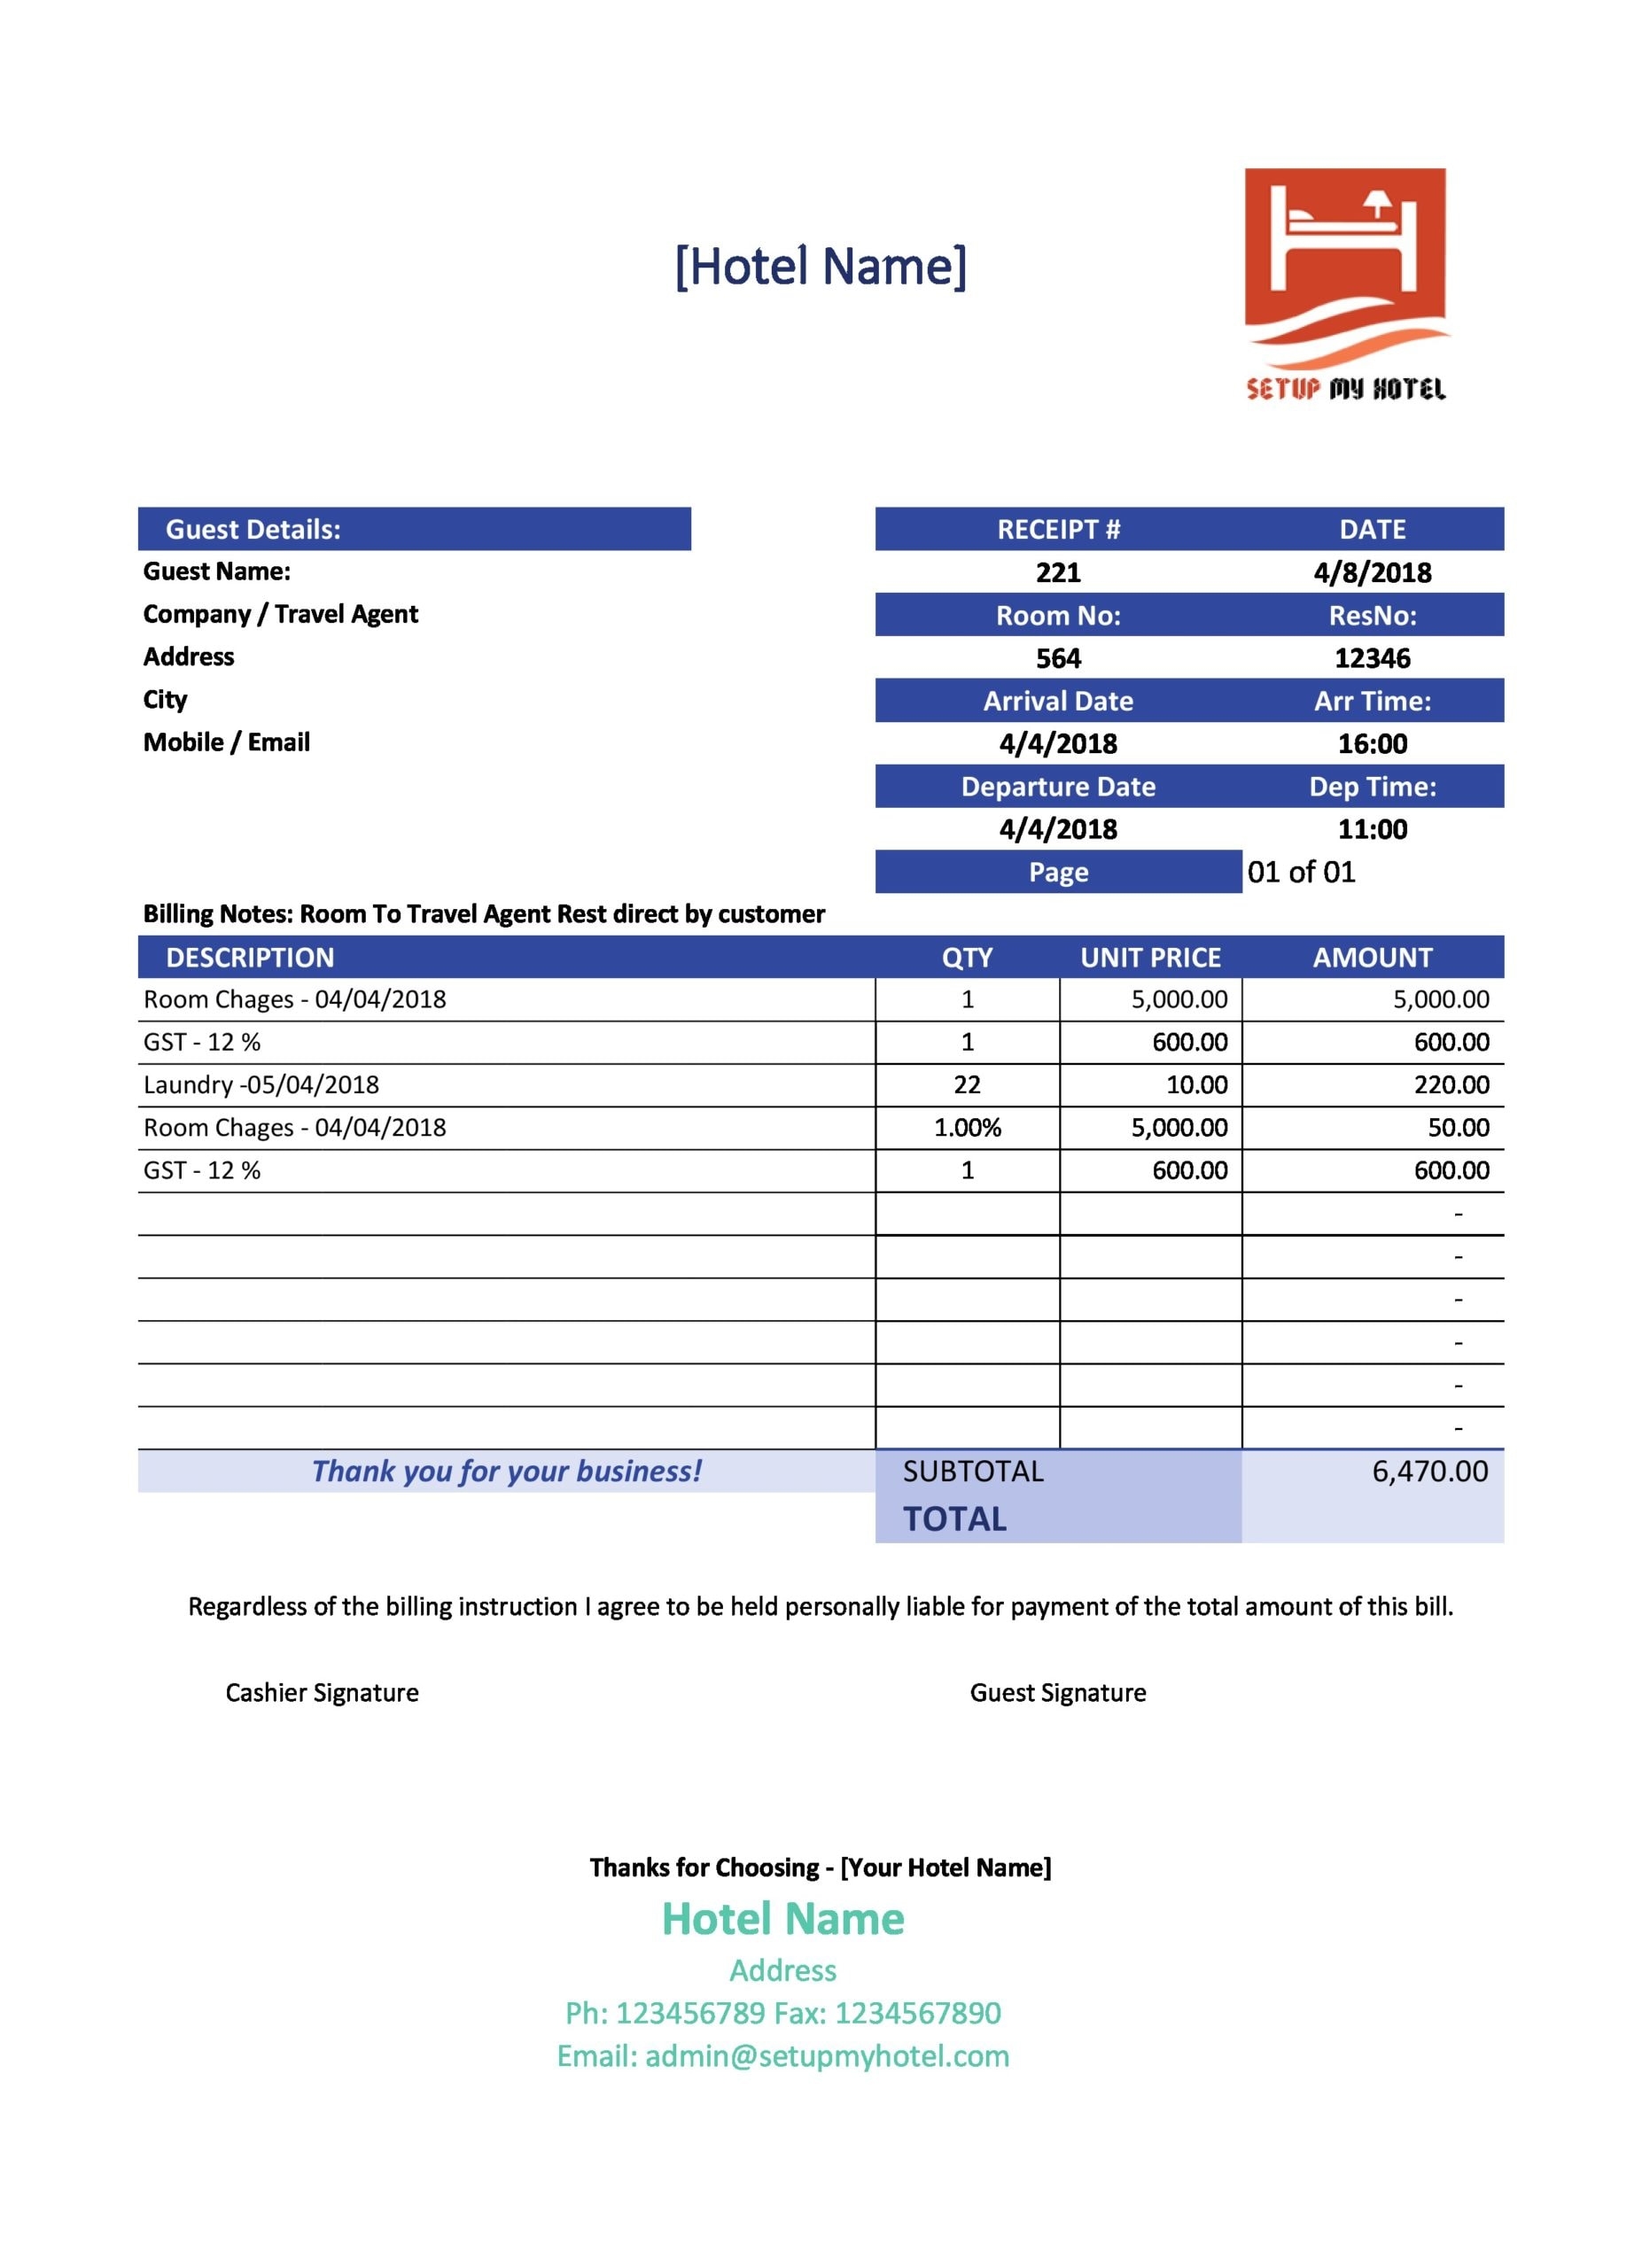 30 Real Fake Hotel Receipt Templates TemplateArchive